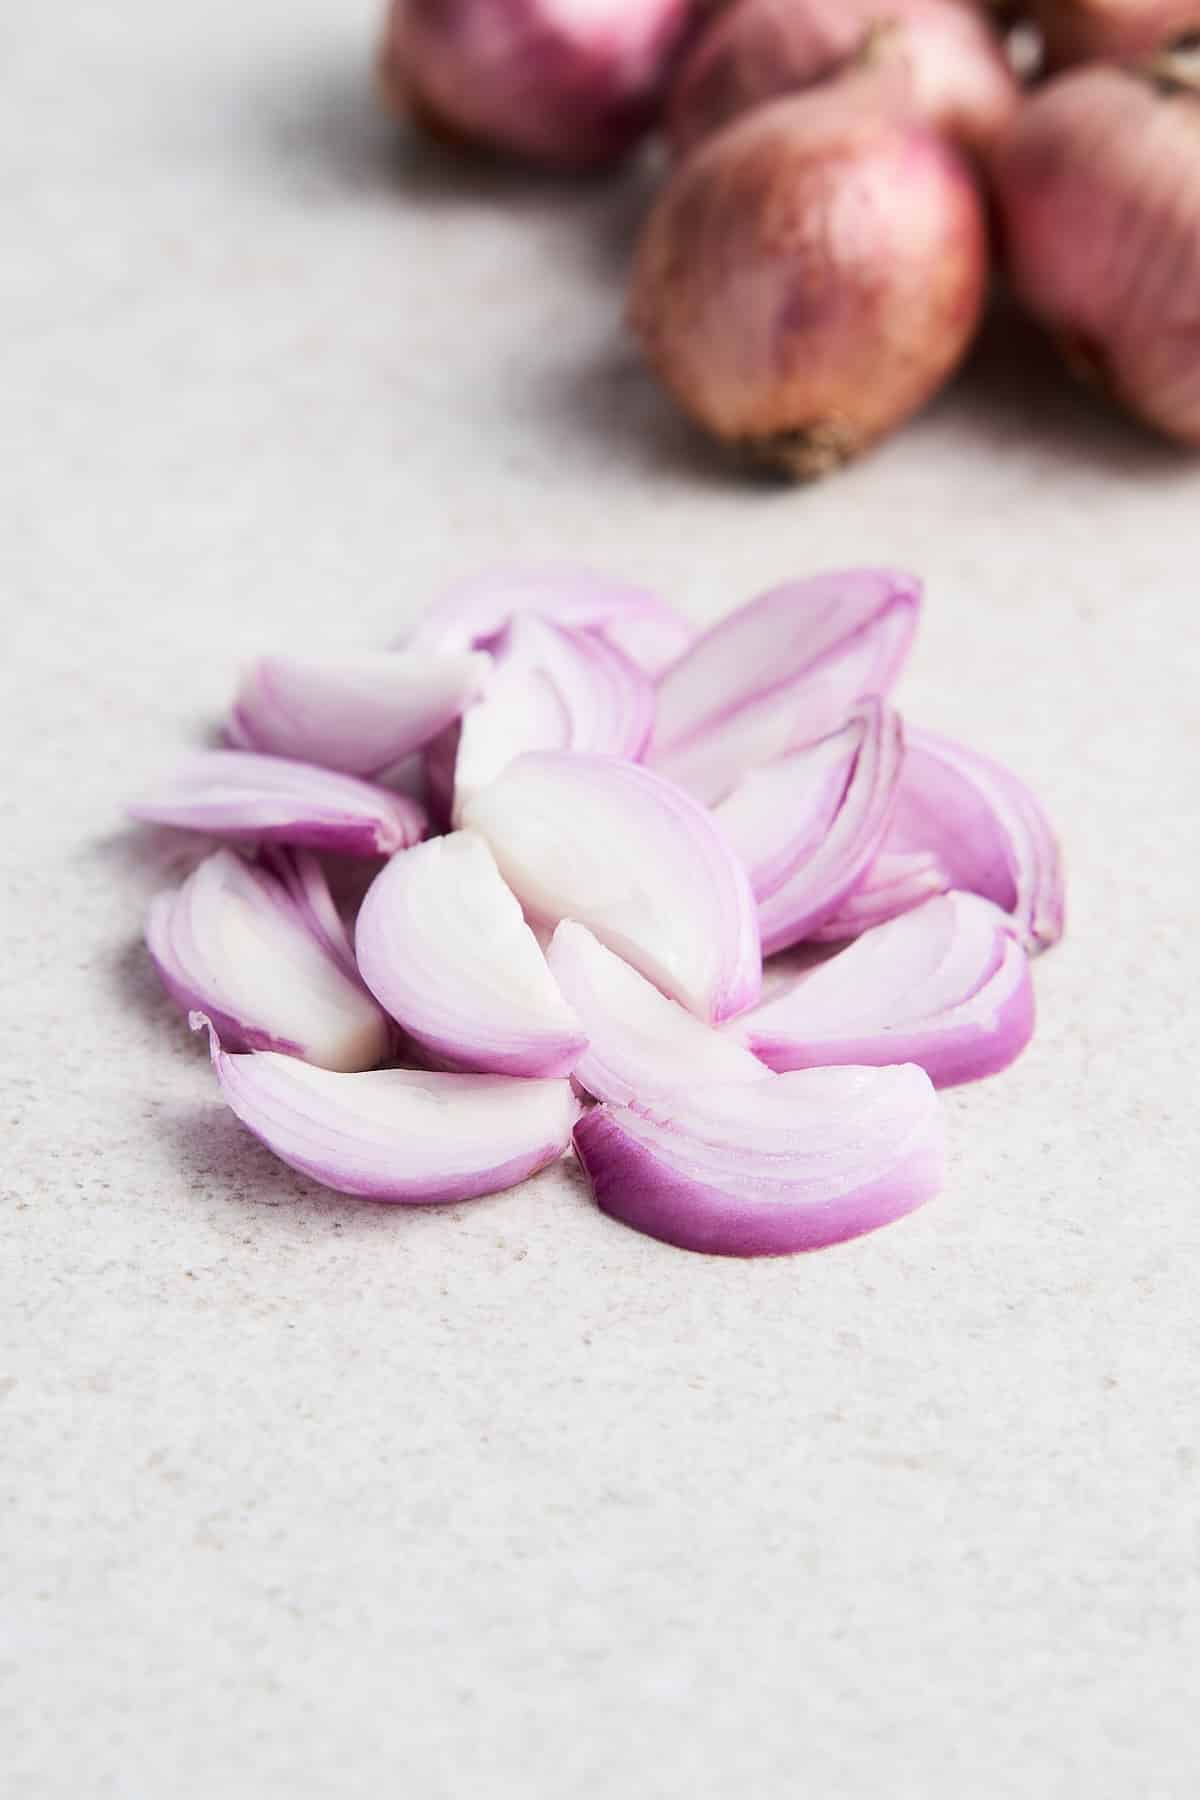 Thickly sliced shallots.